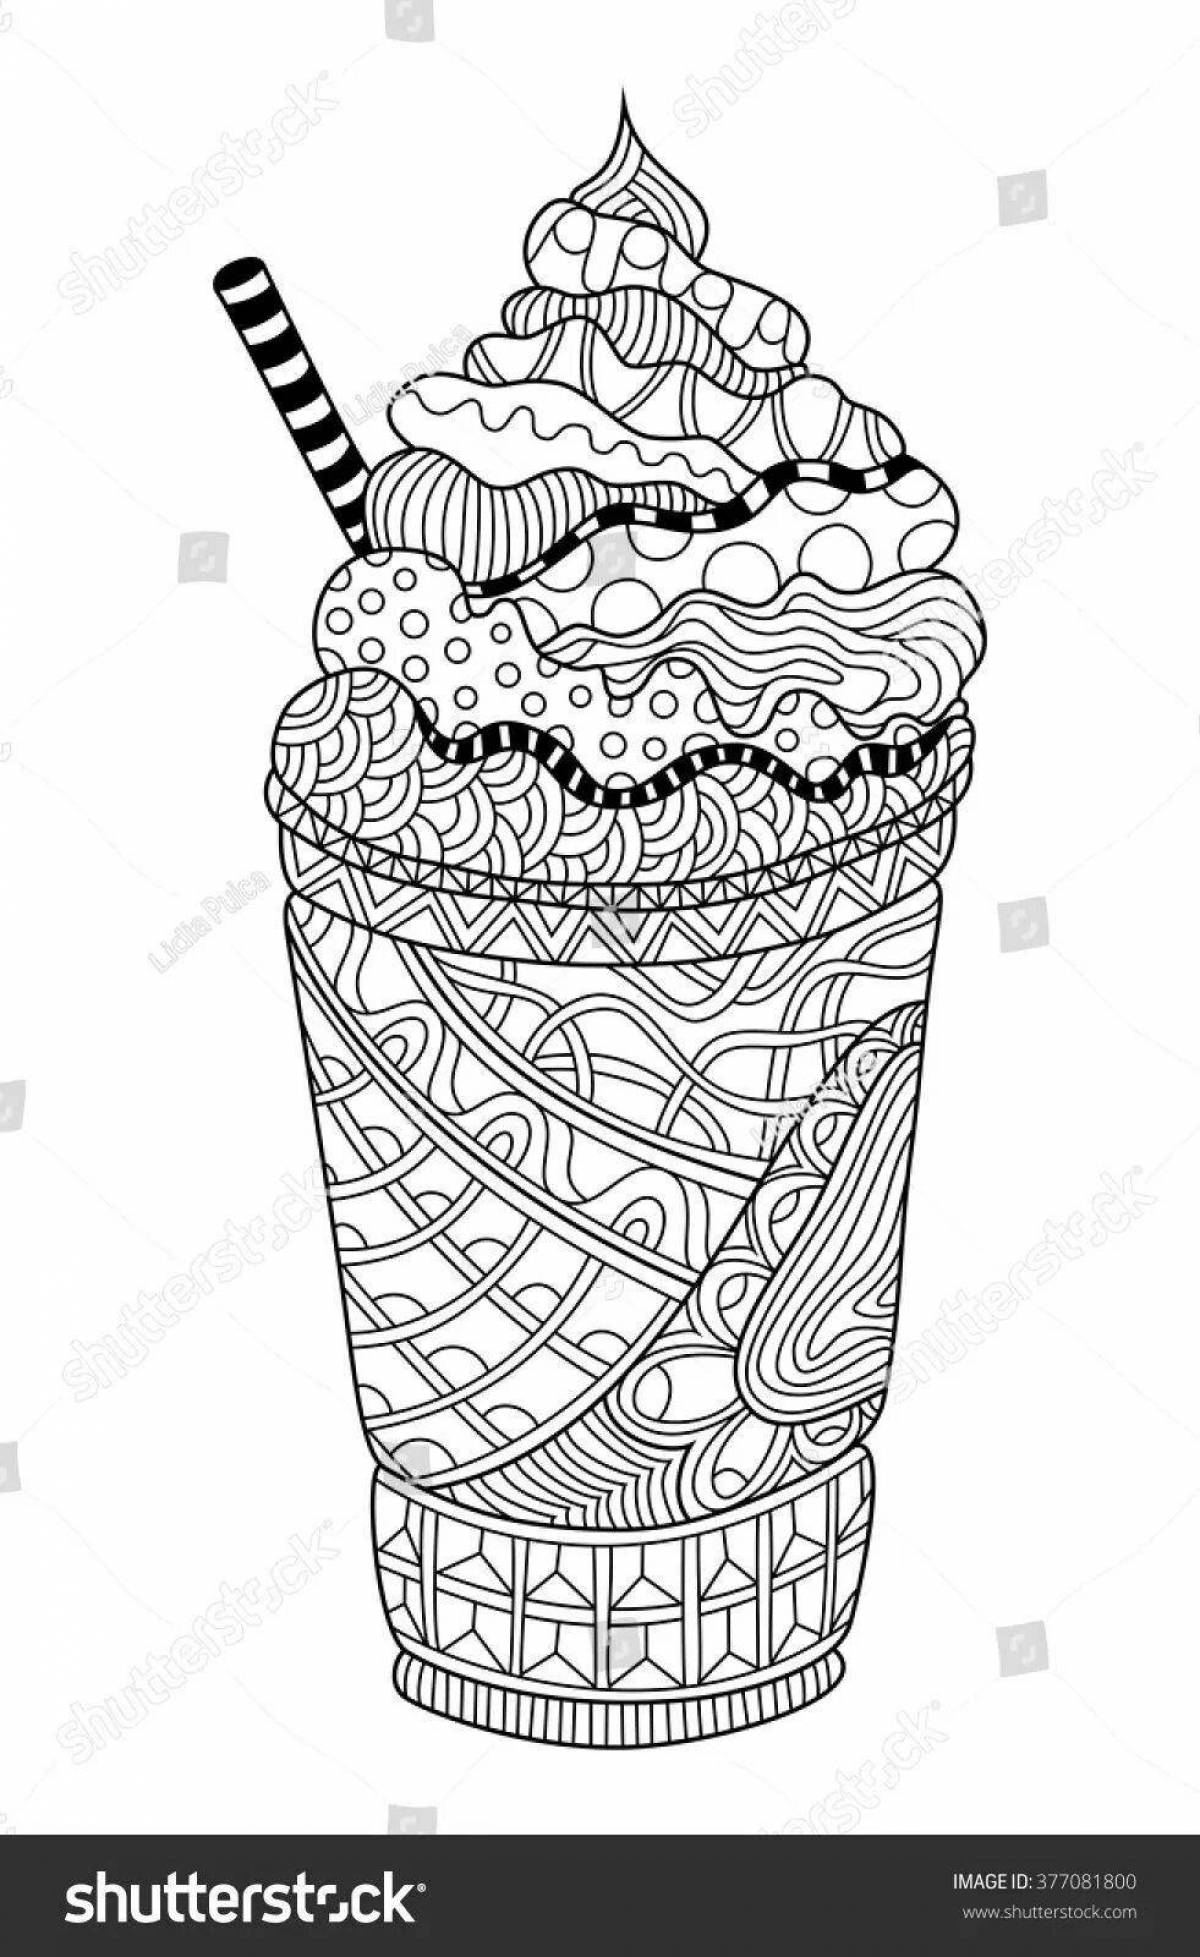 Relaxing anti-stress ice cream coloring book